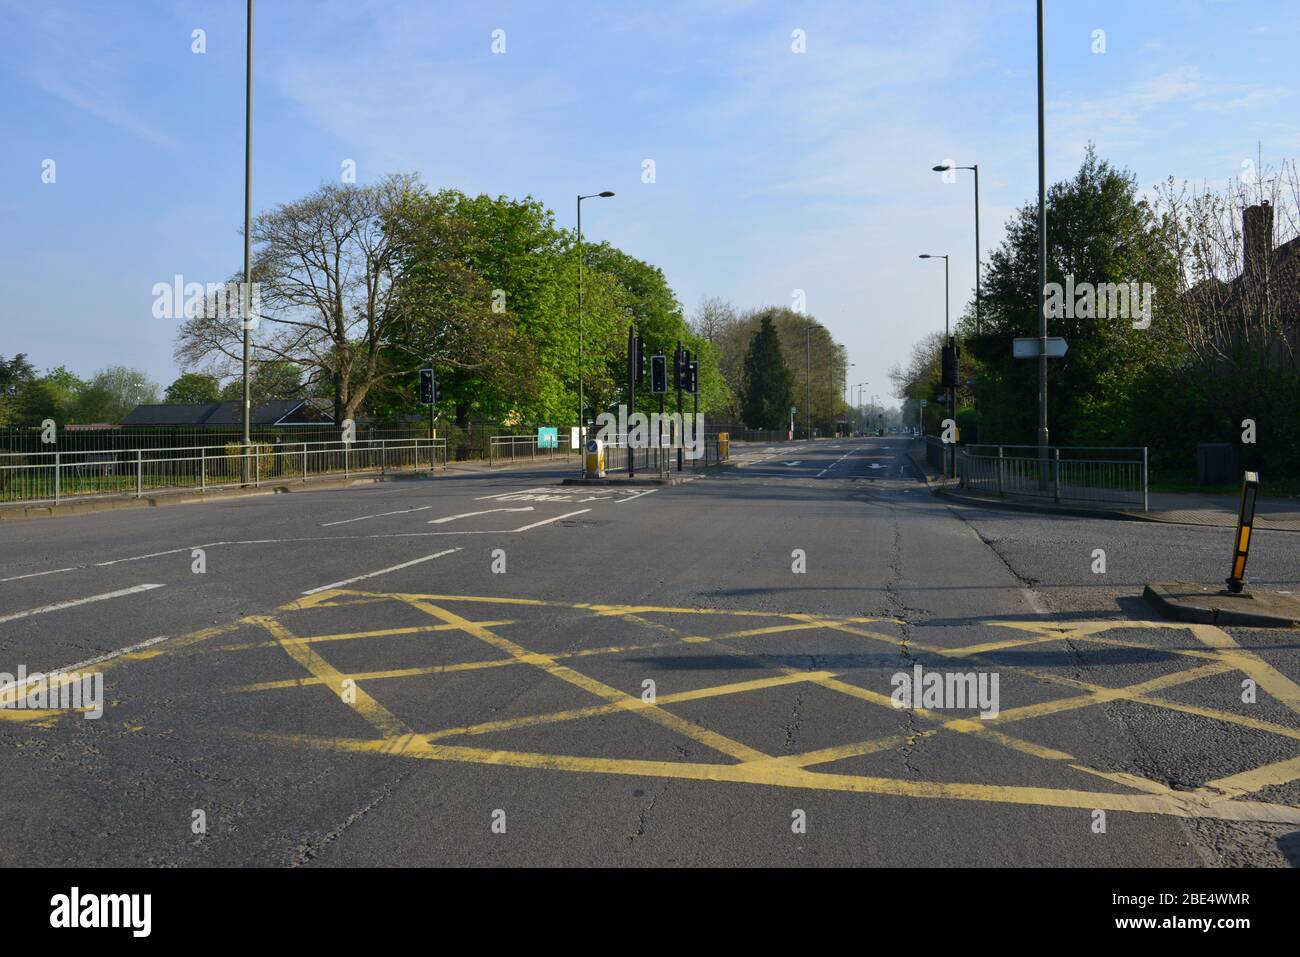 Empty traffic light during the Covid-19 Lock down in Horley, Surrey.  Being within 1 mile from Gatwick airport these lights are normally very busy. Stock Photo